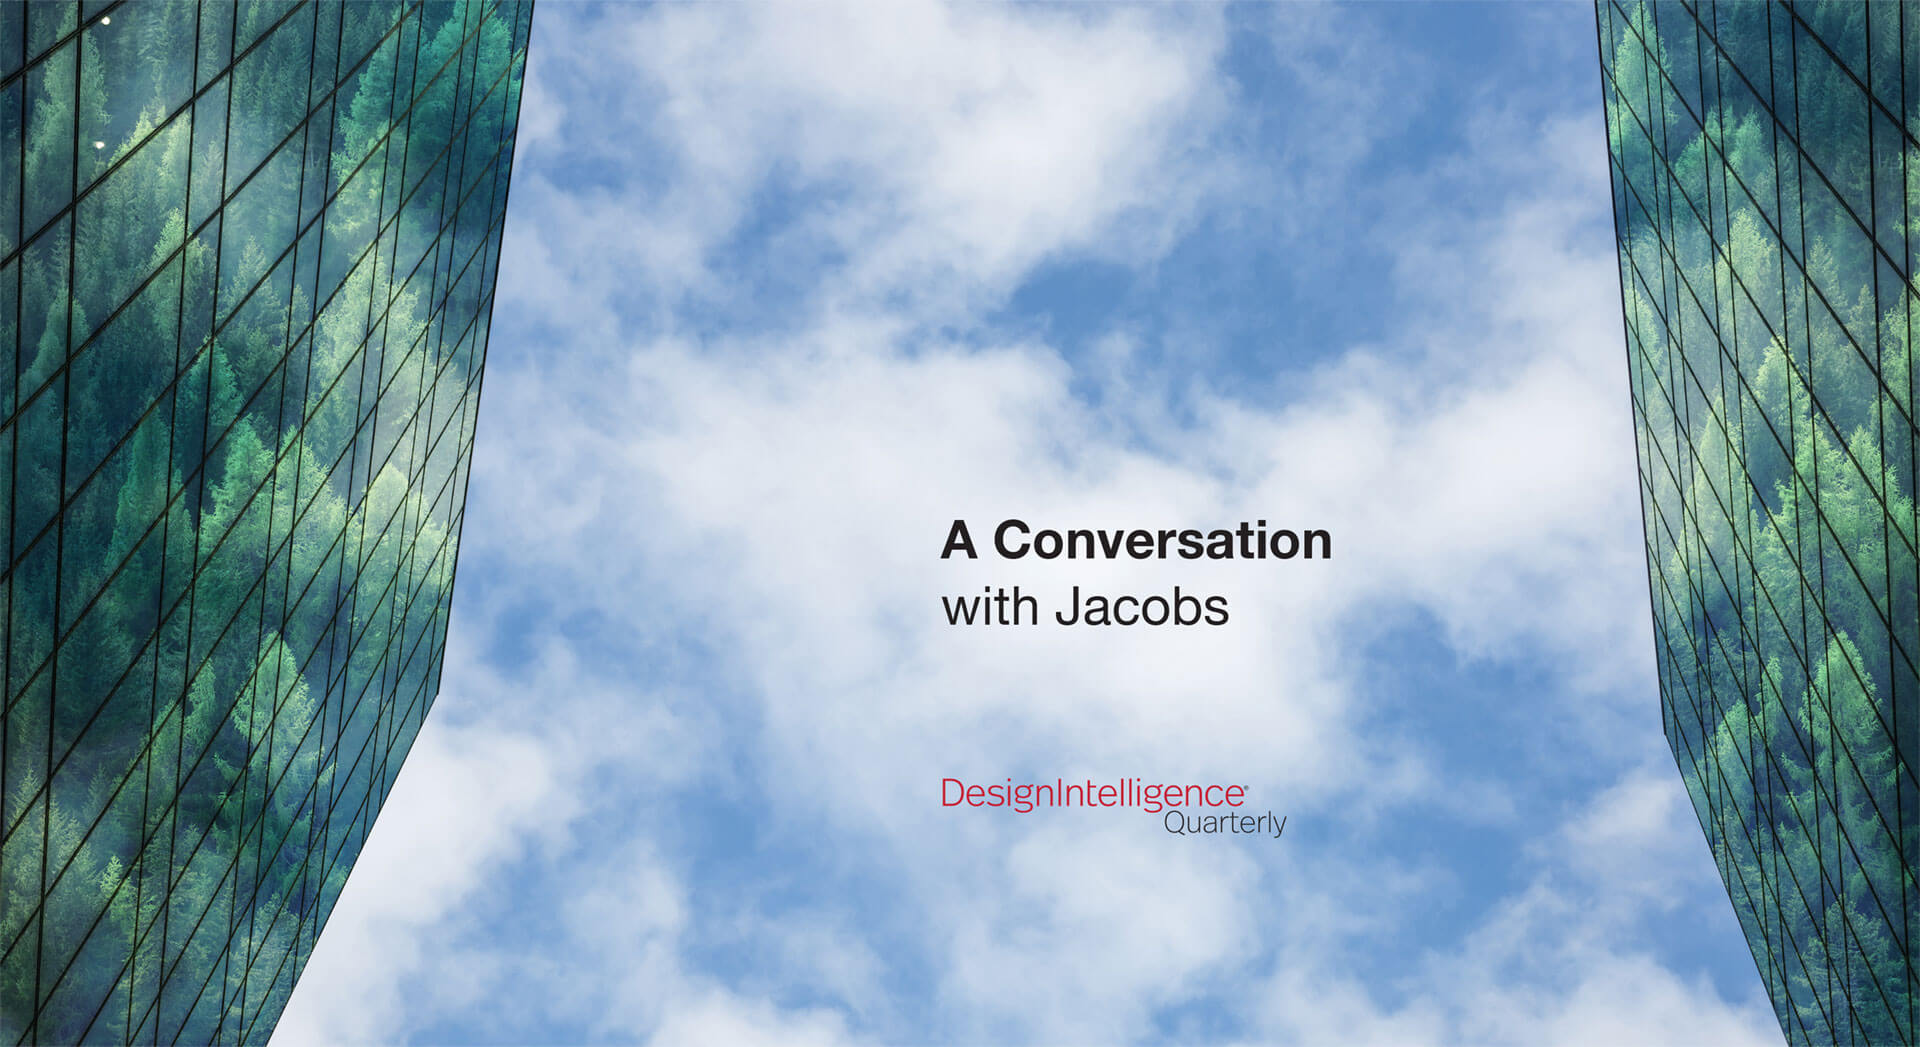 A Conversation with Jacobs